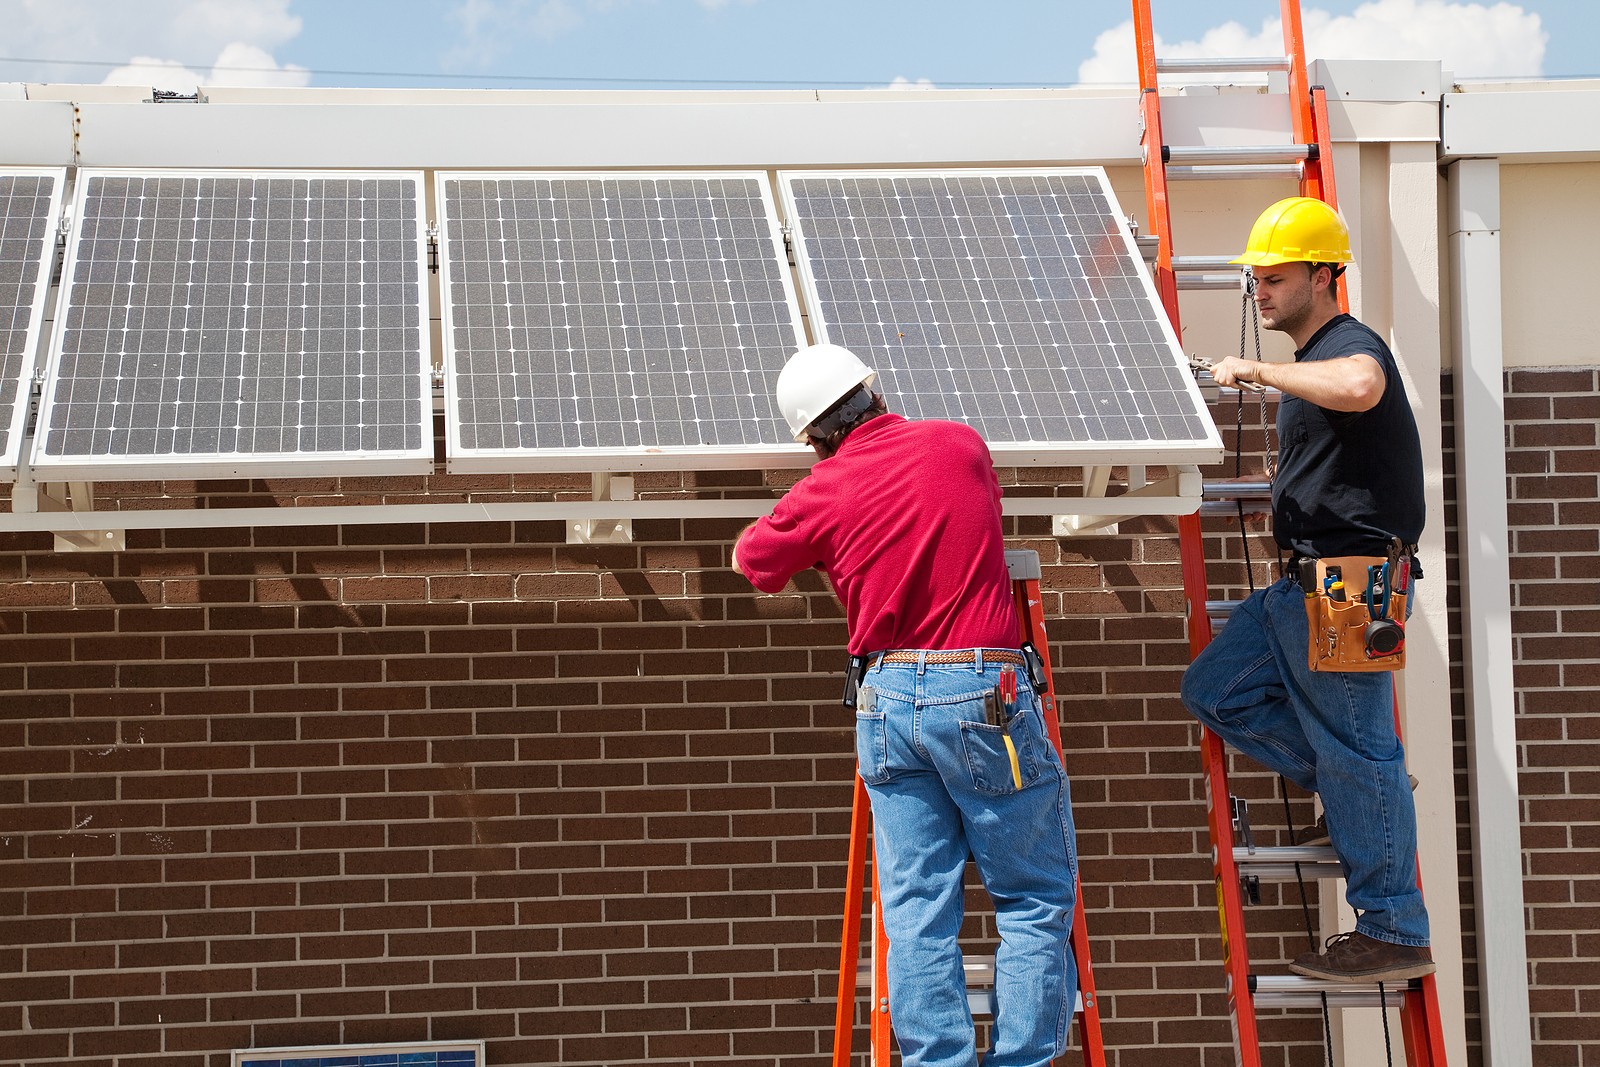 Two solar company employees installing solar panels on the side of a school building while standing on ladders.